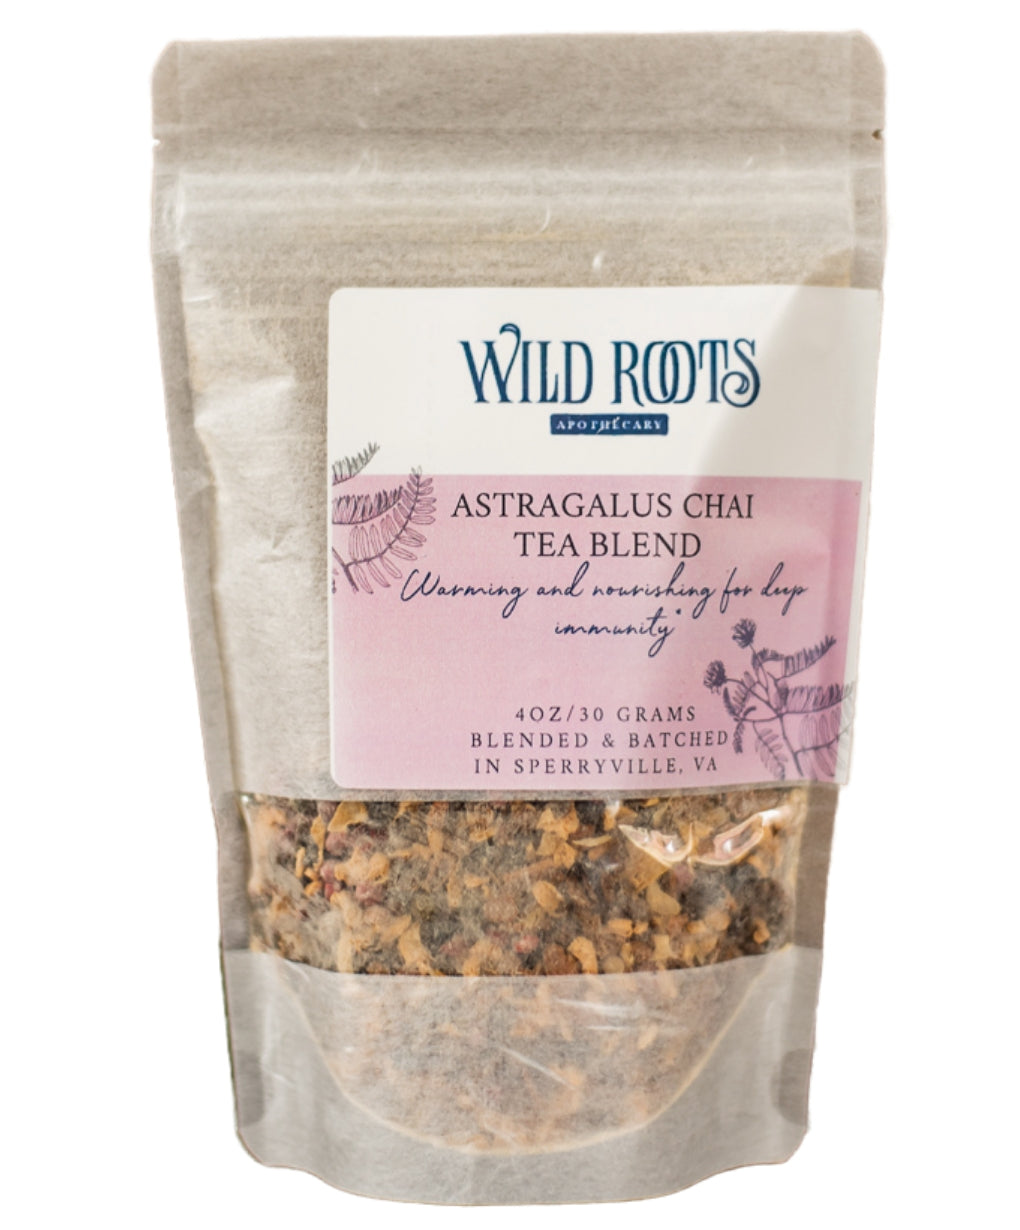 Astragalus Chai Tea—Wild Roots Apothecary